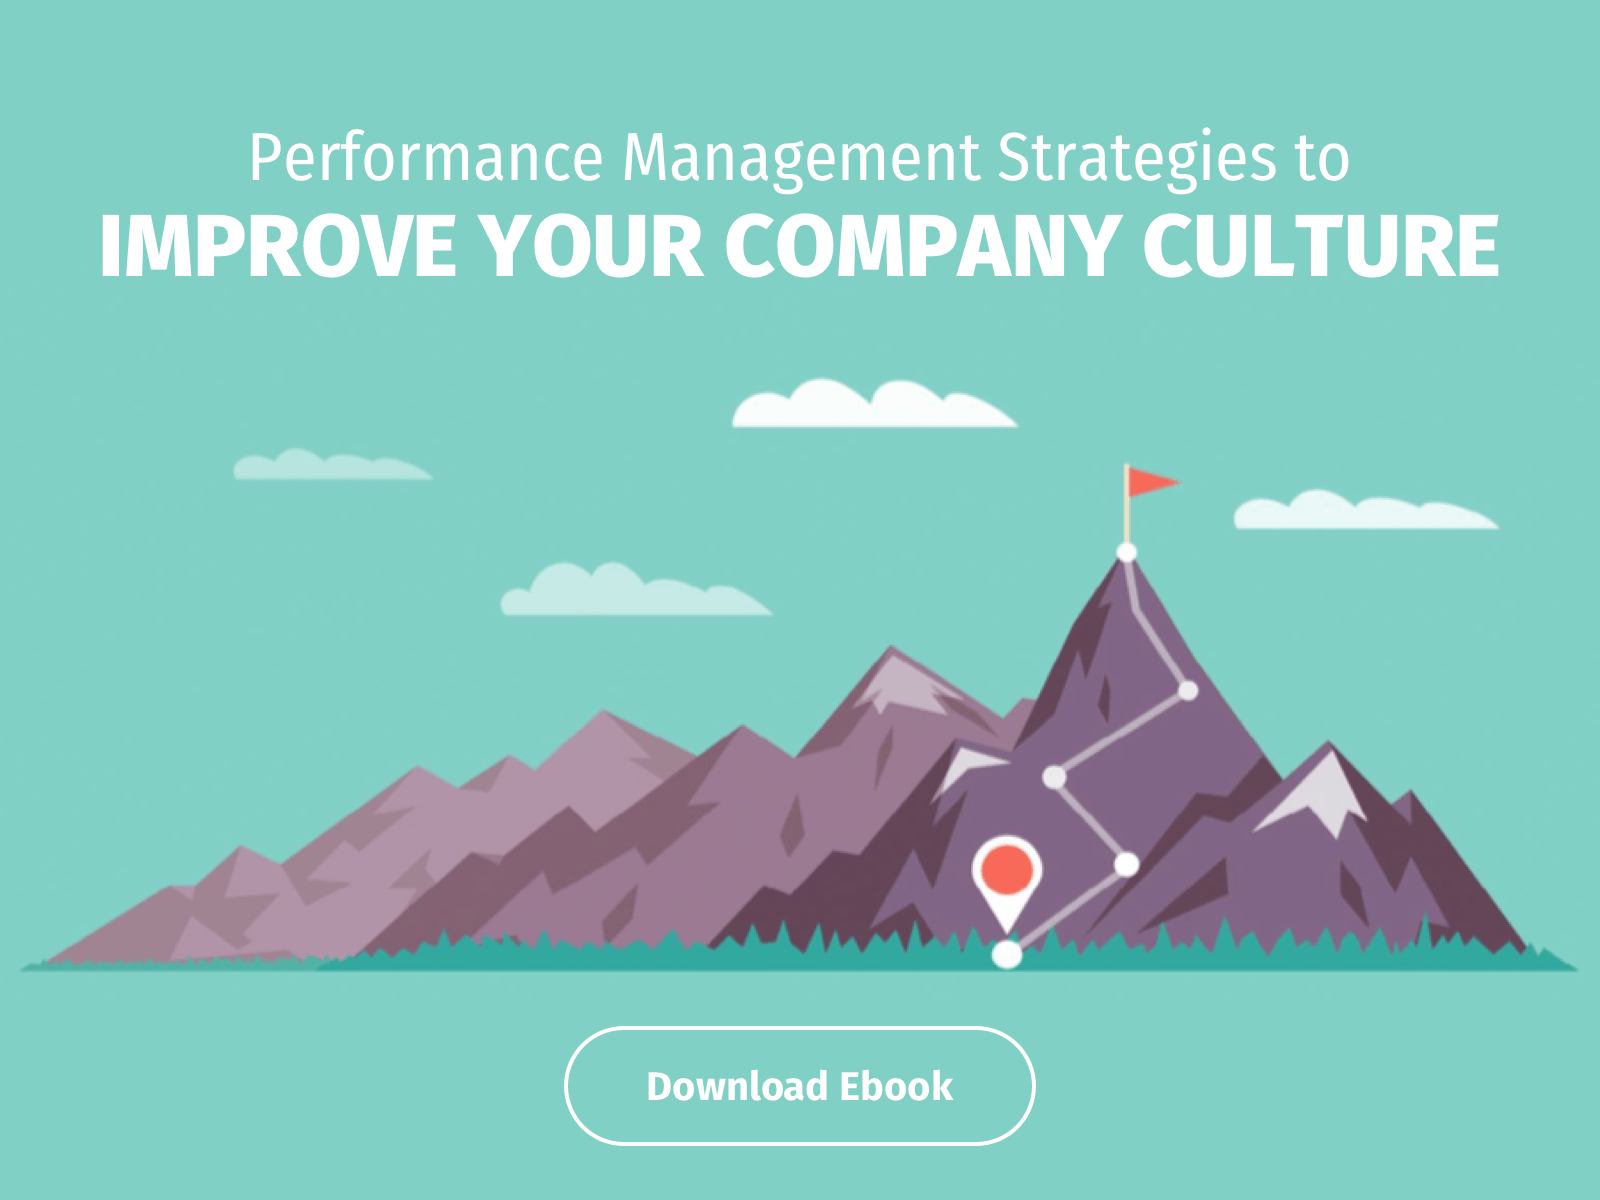 Performance Management Strategies to Improve Your Company Culture 800x600